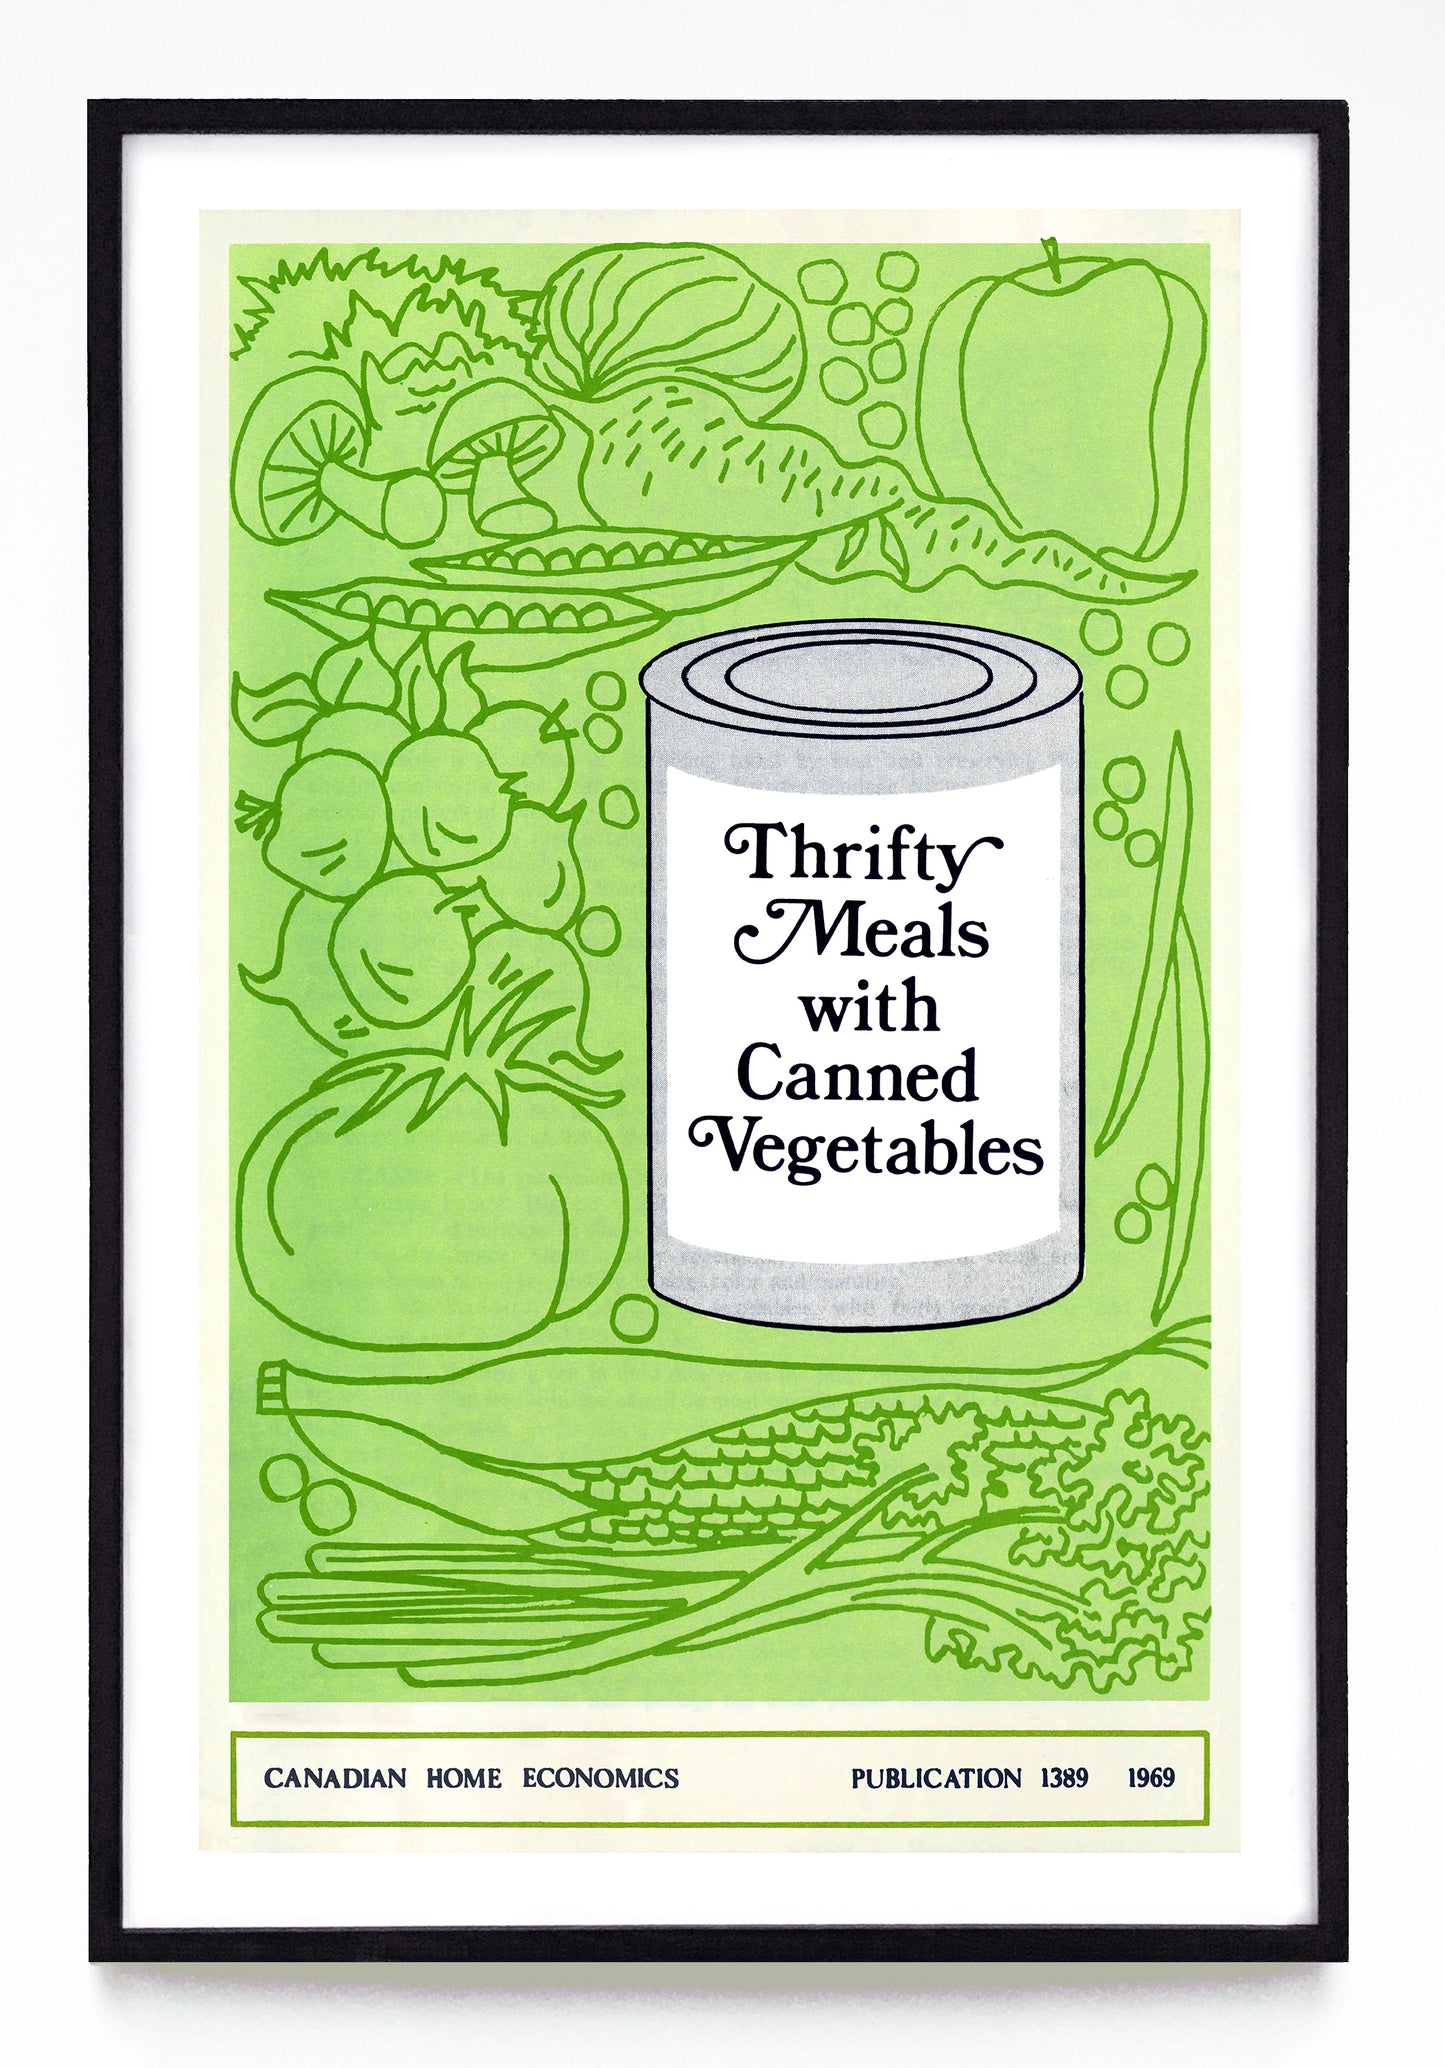 "Thrifty Meals with Canned Vegetables" print